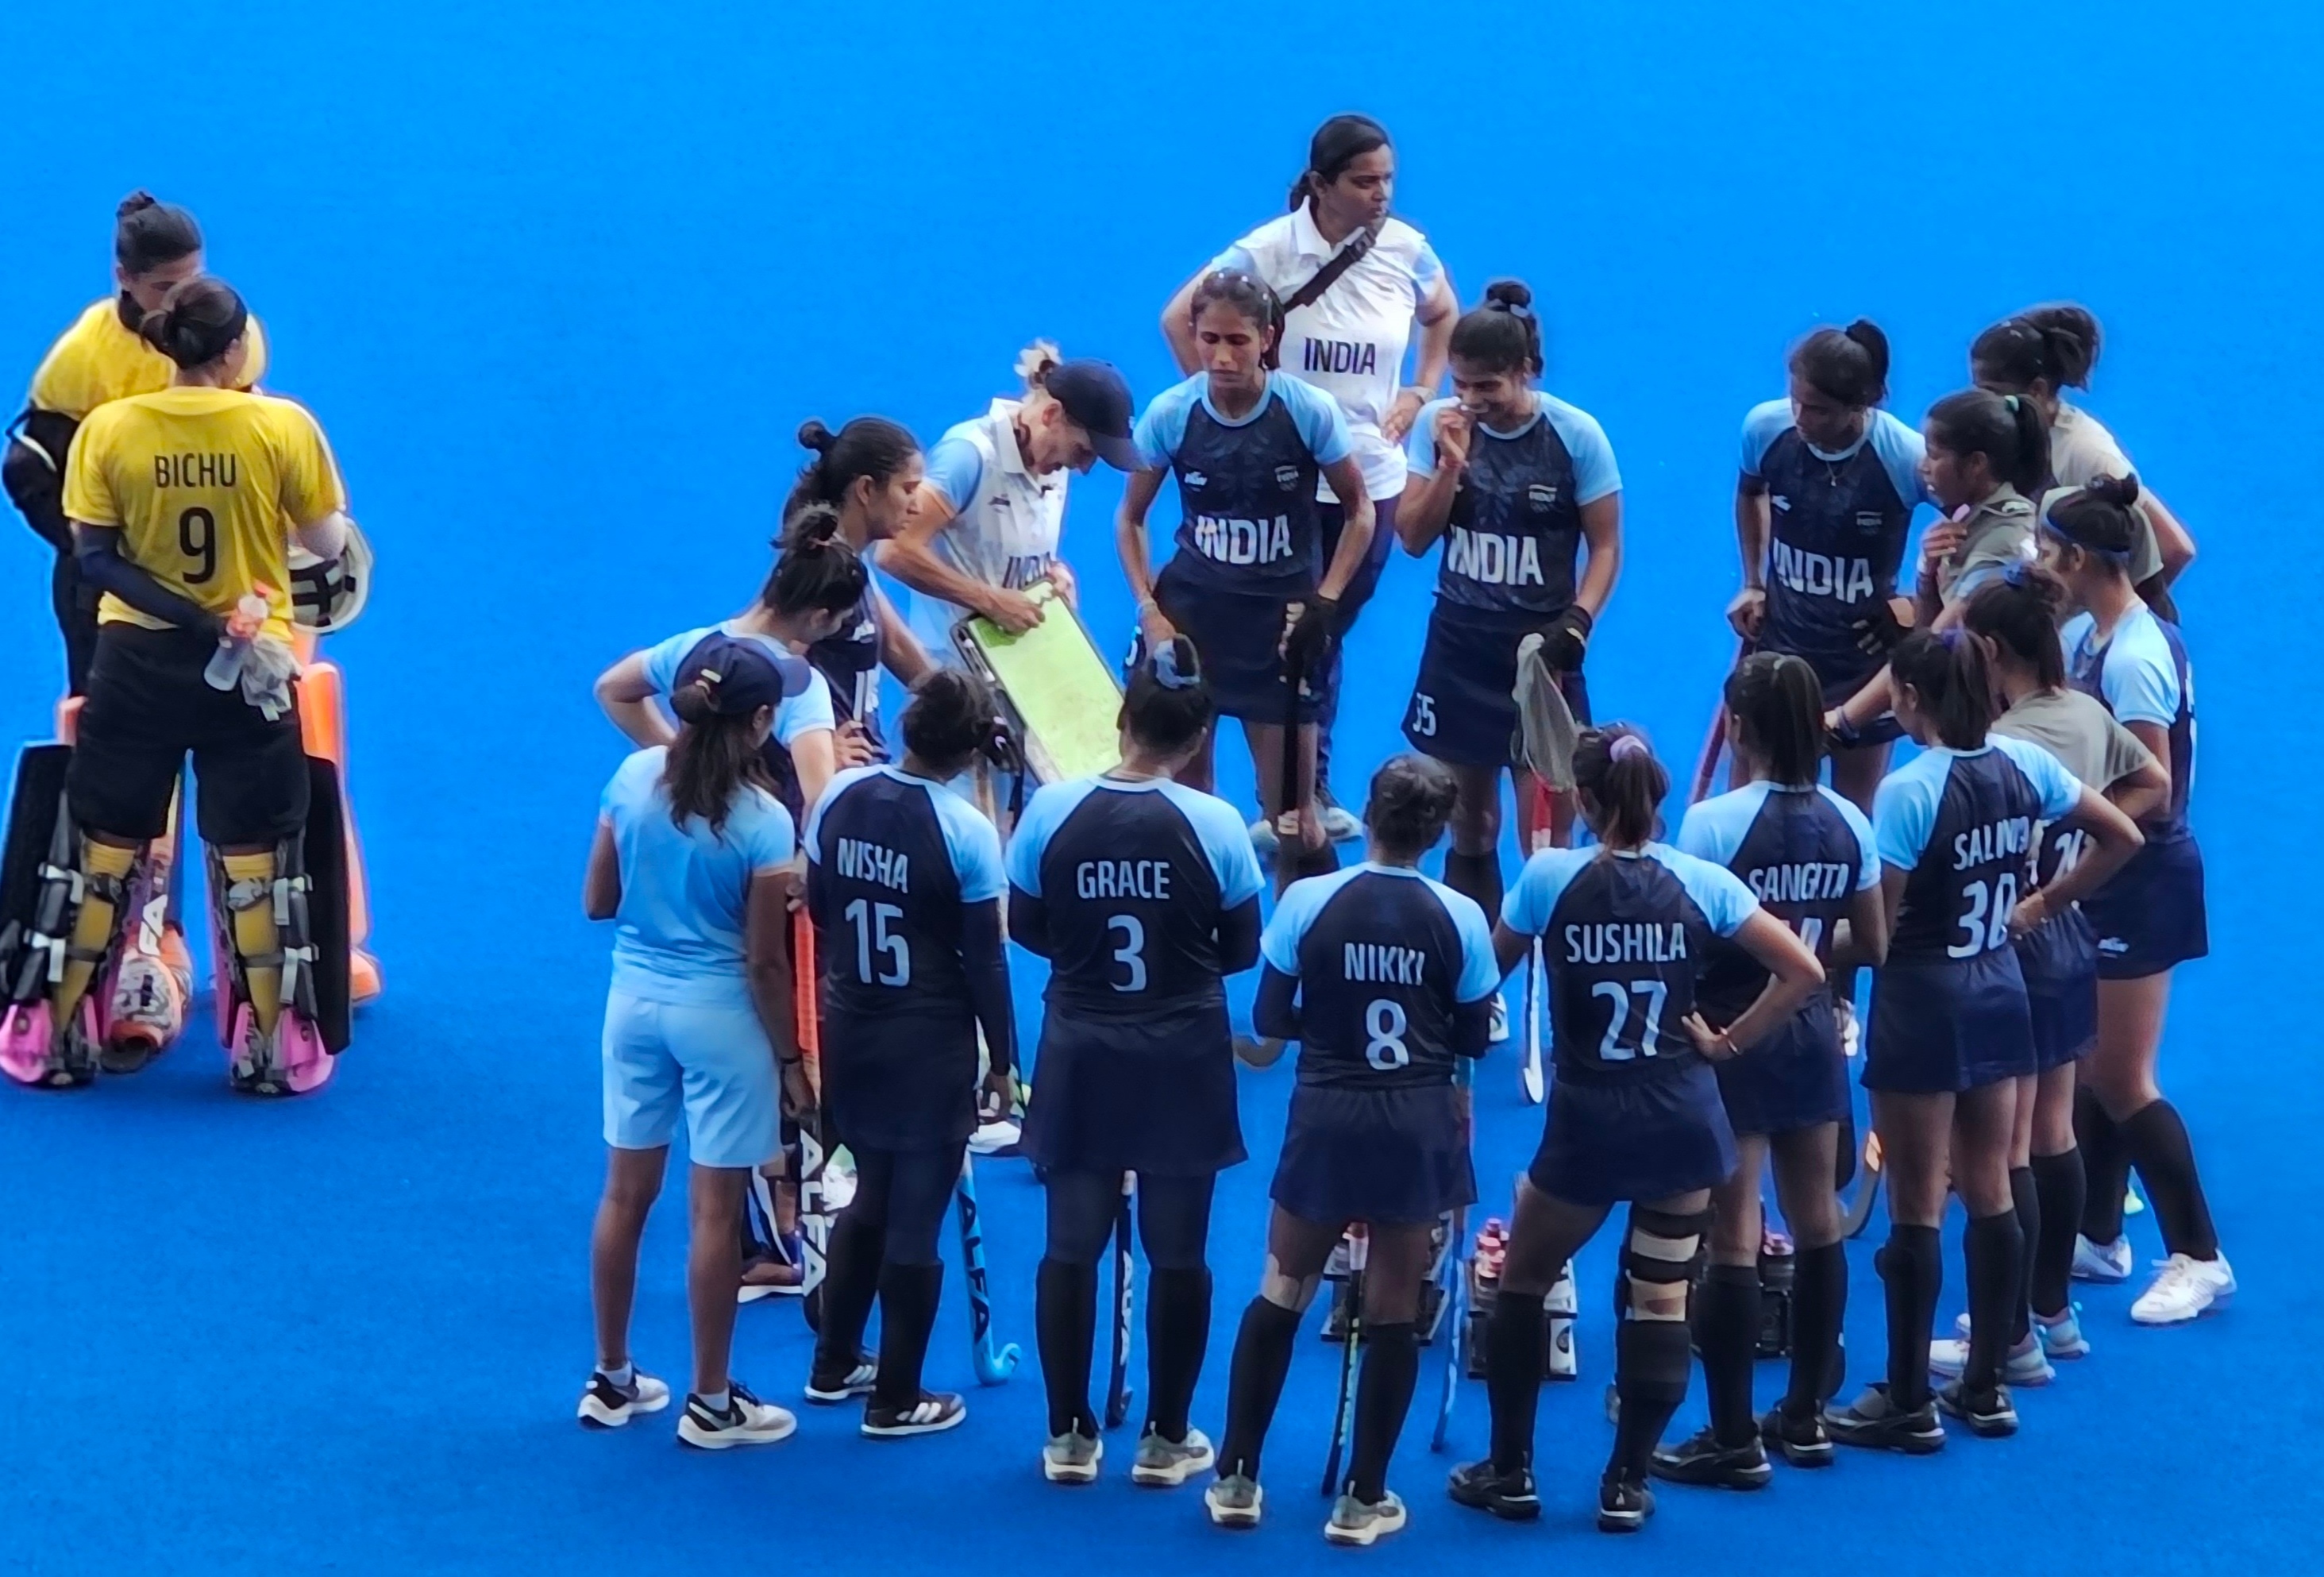 Indian Women's Hockey Team kicks off their Asian Games campaign with a commanding 13-0 victory against Singapore